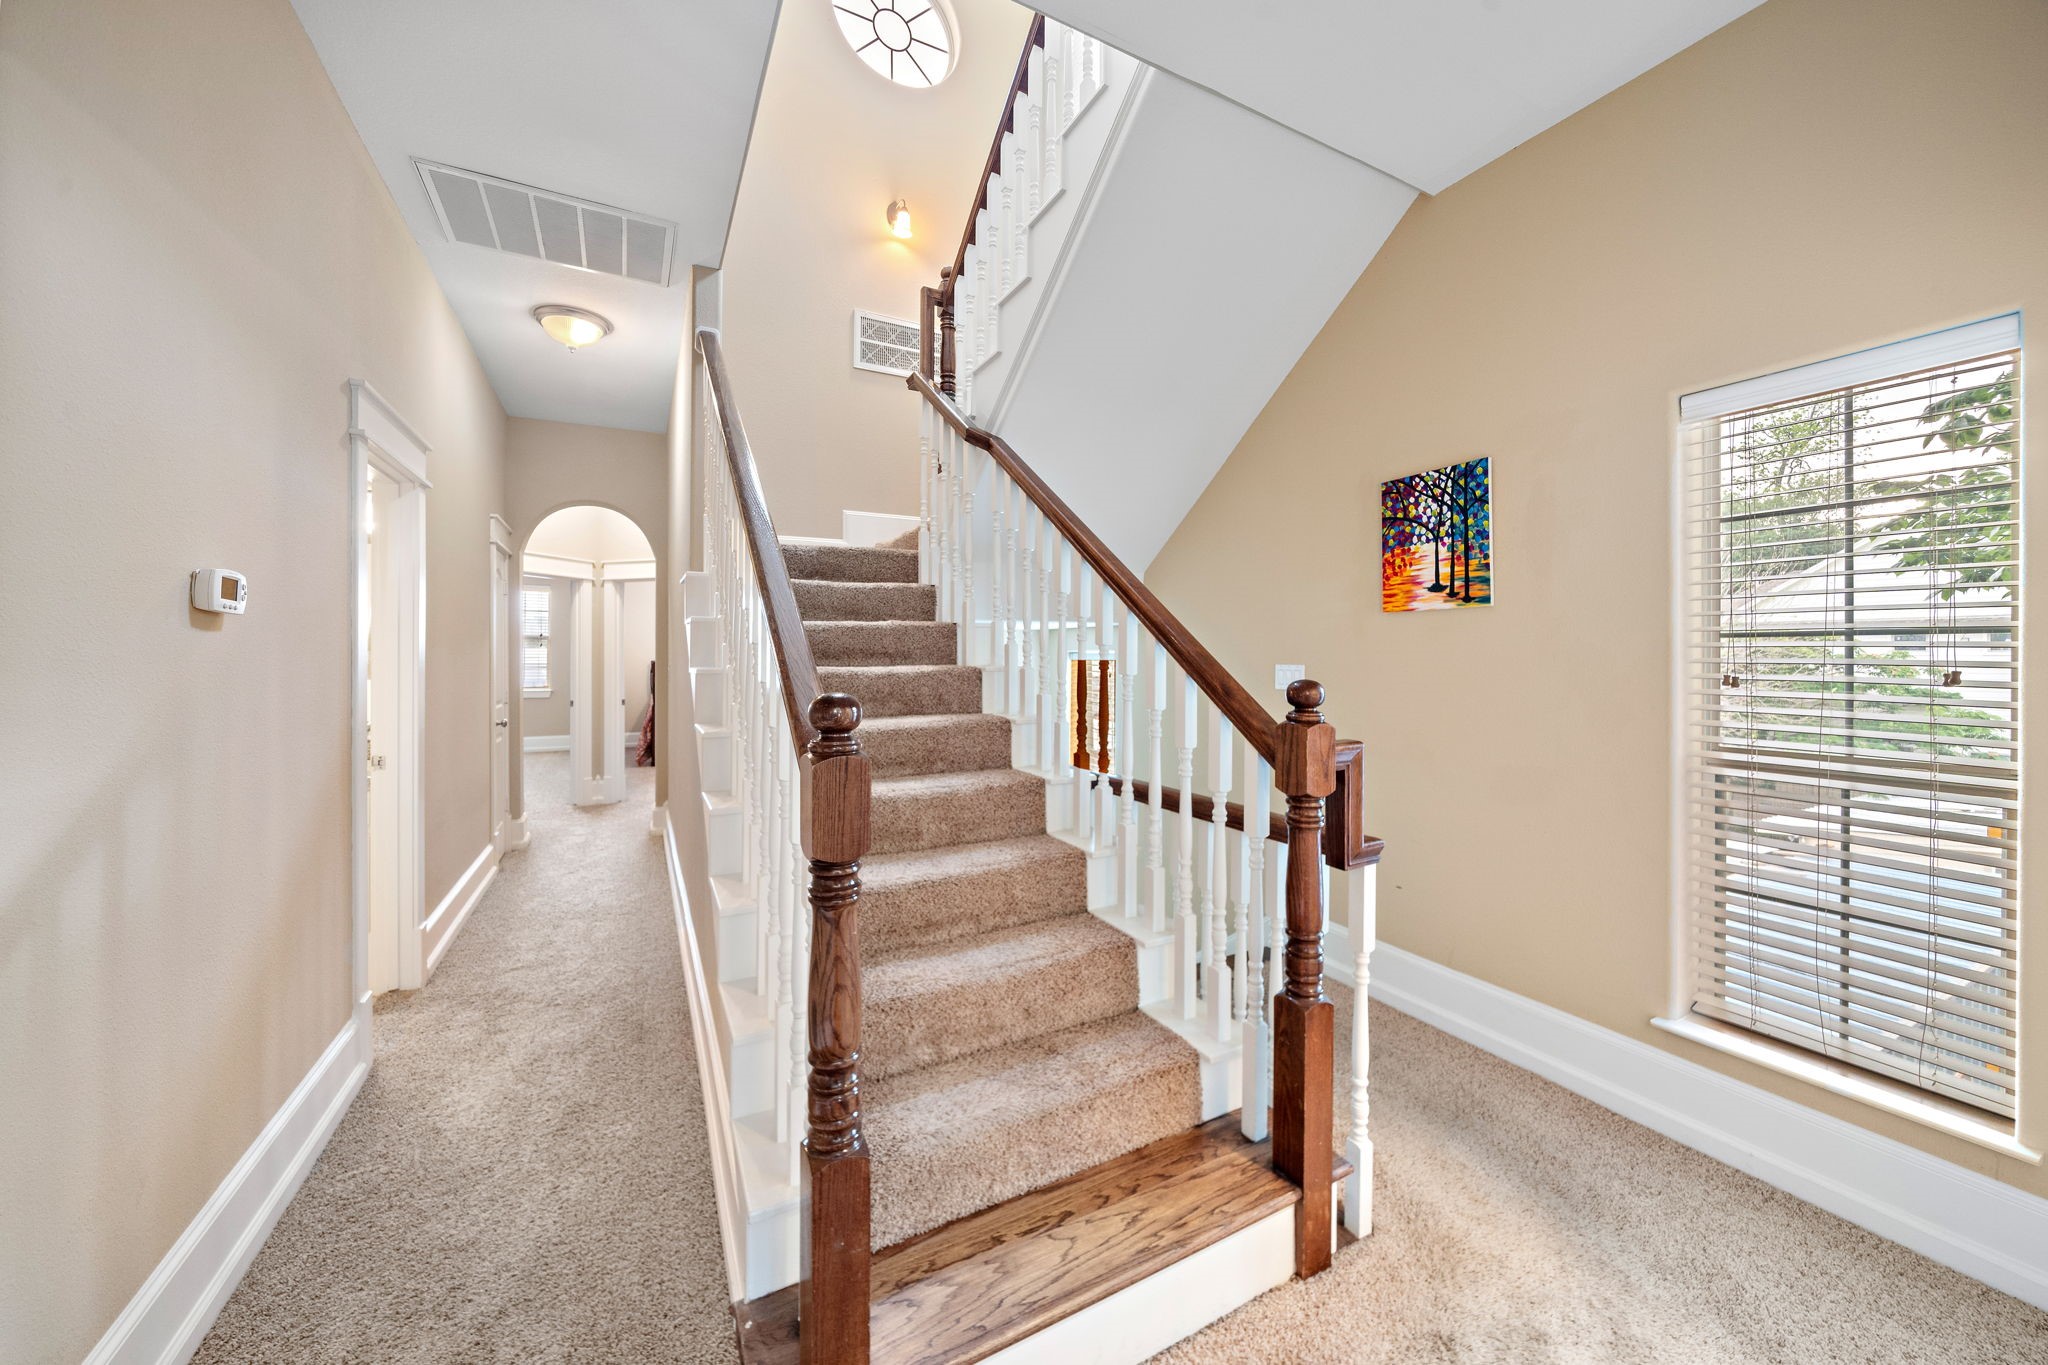 2nd story hallway and stairwell - If you have additional questions regarding 820 W 17th Street  in Houston or would like to tour the property with us call 800-660-1022 and reference MLS# 53752053.